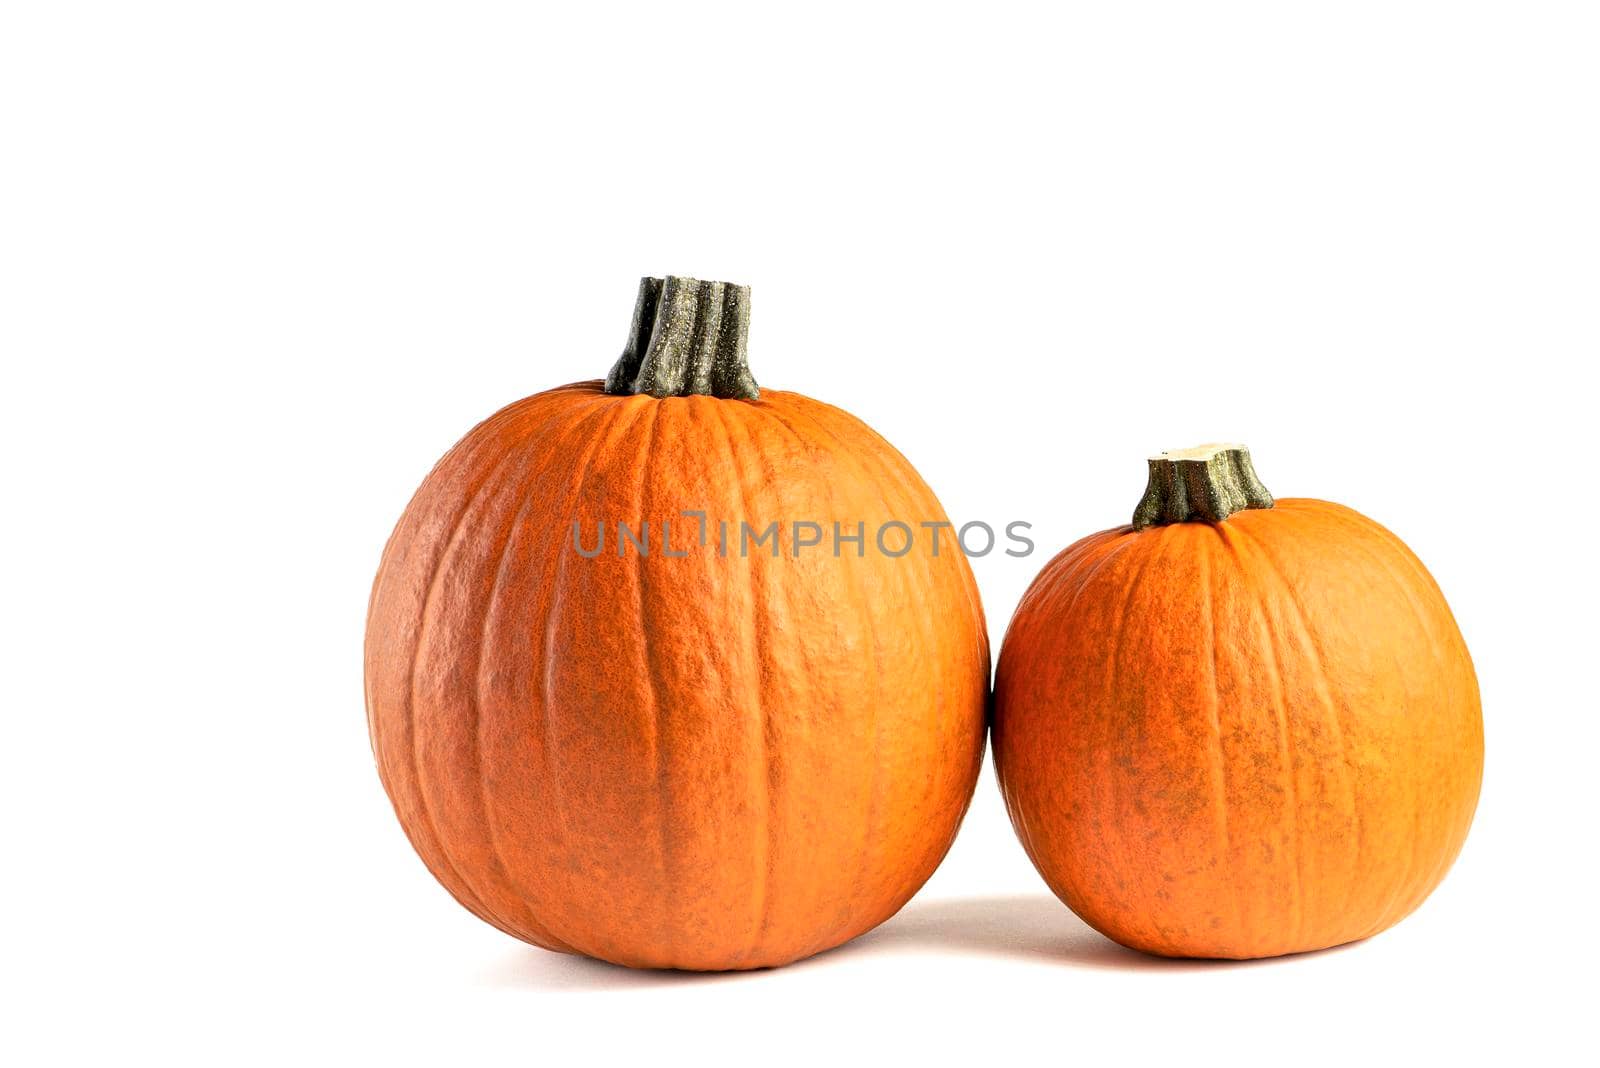 Pumpkin on a white background. Isolated halloween pumpkin isolate on white to insert into your project or design. Two orange pumpkins casting a shadow.